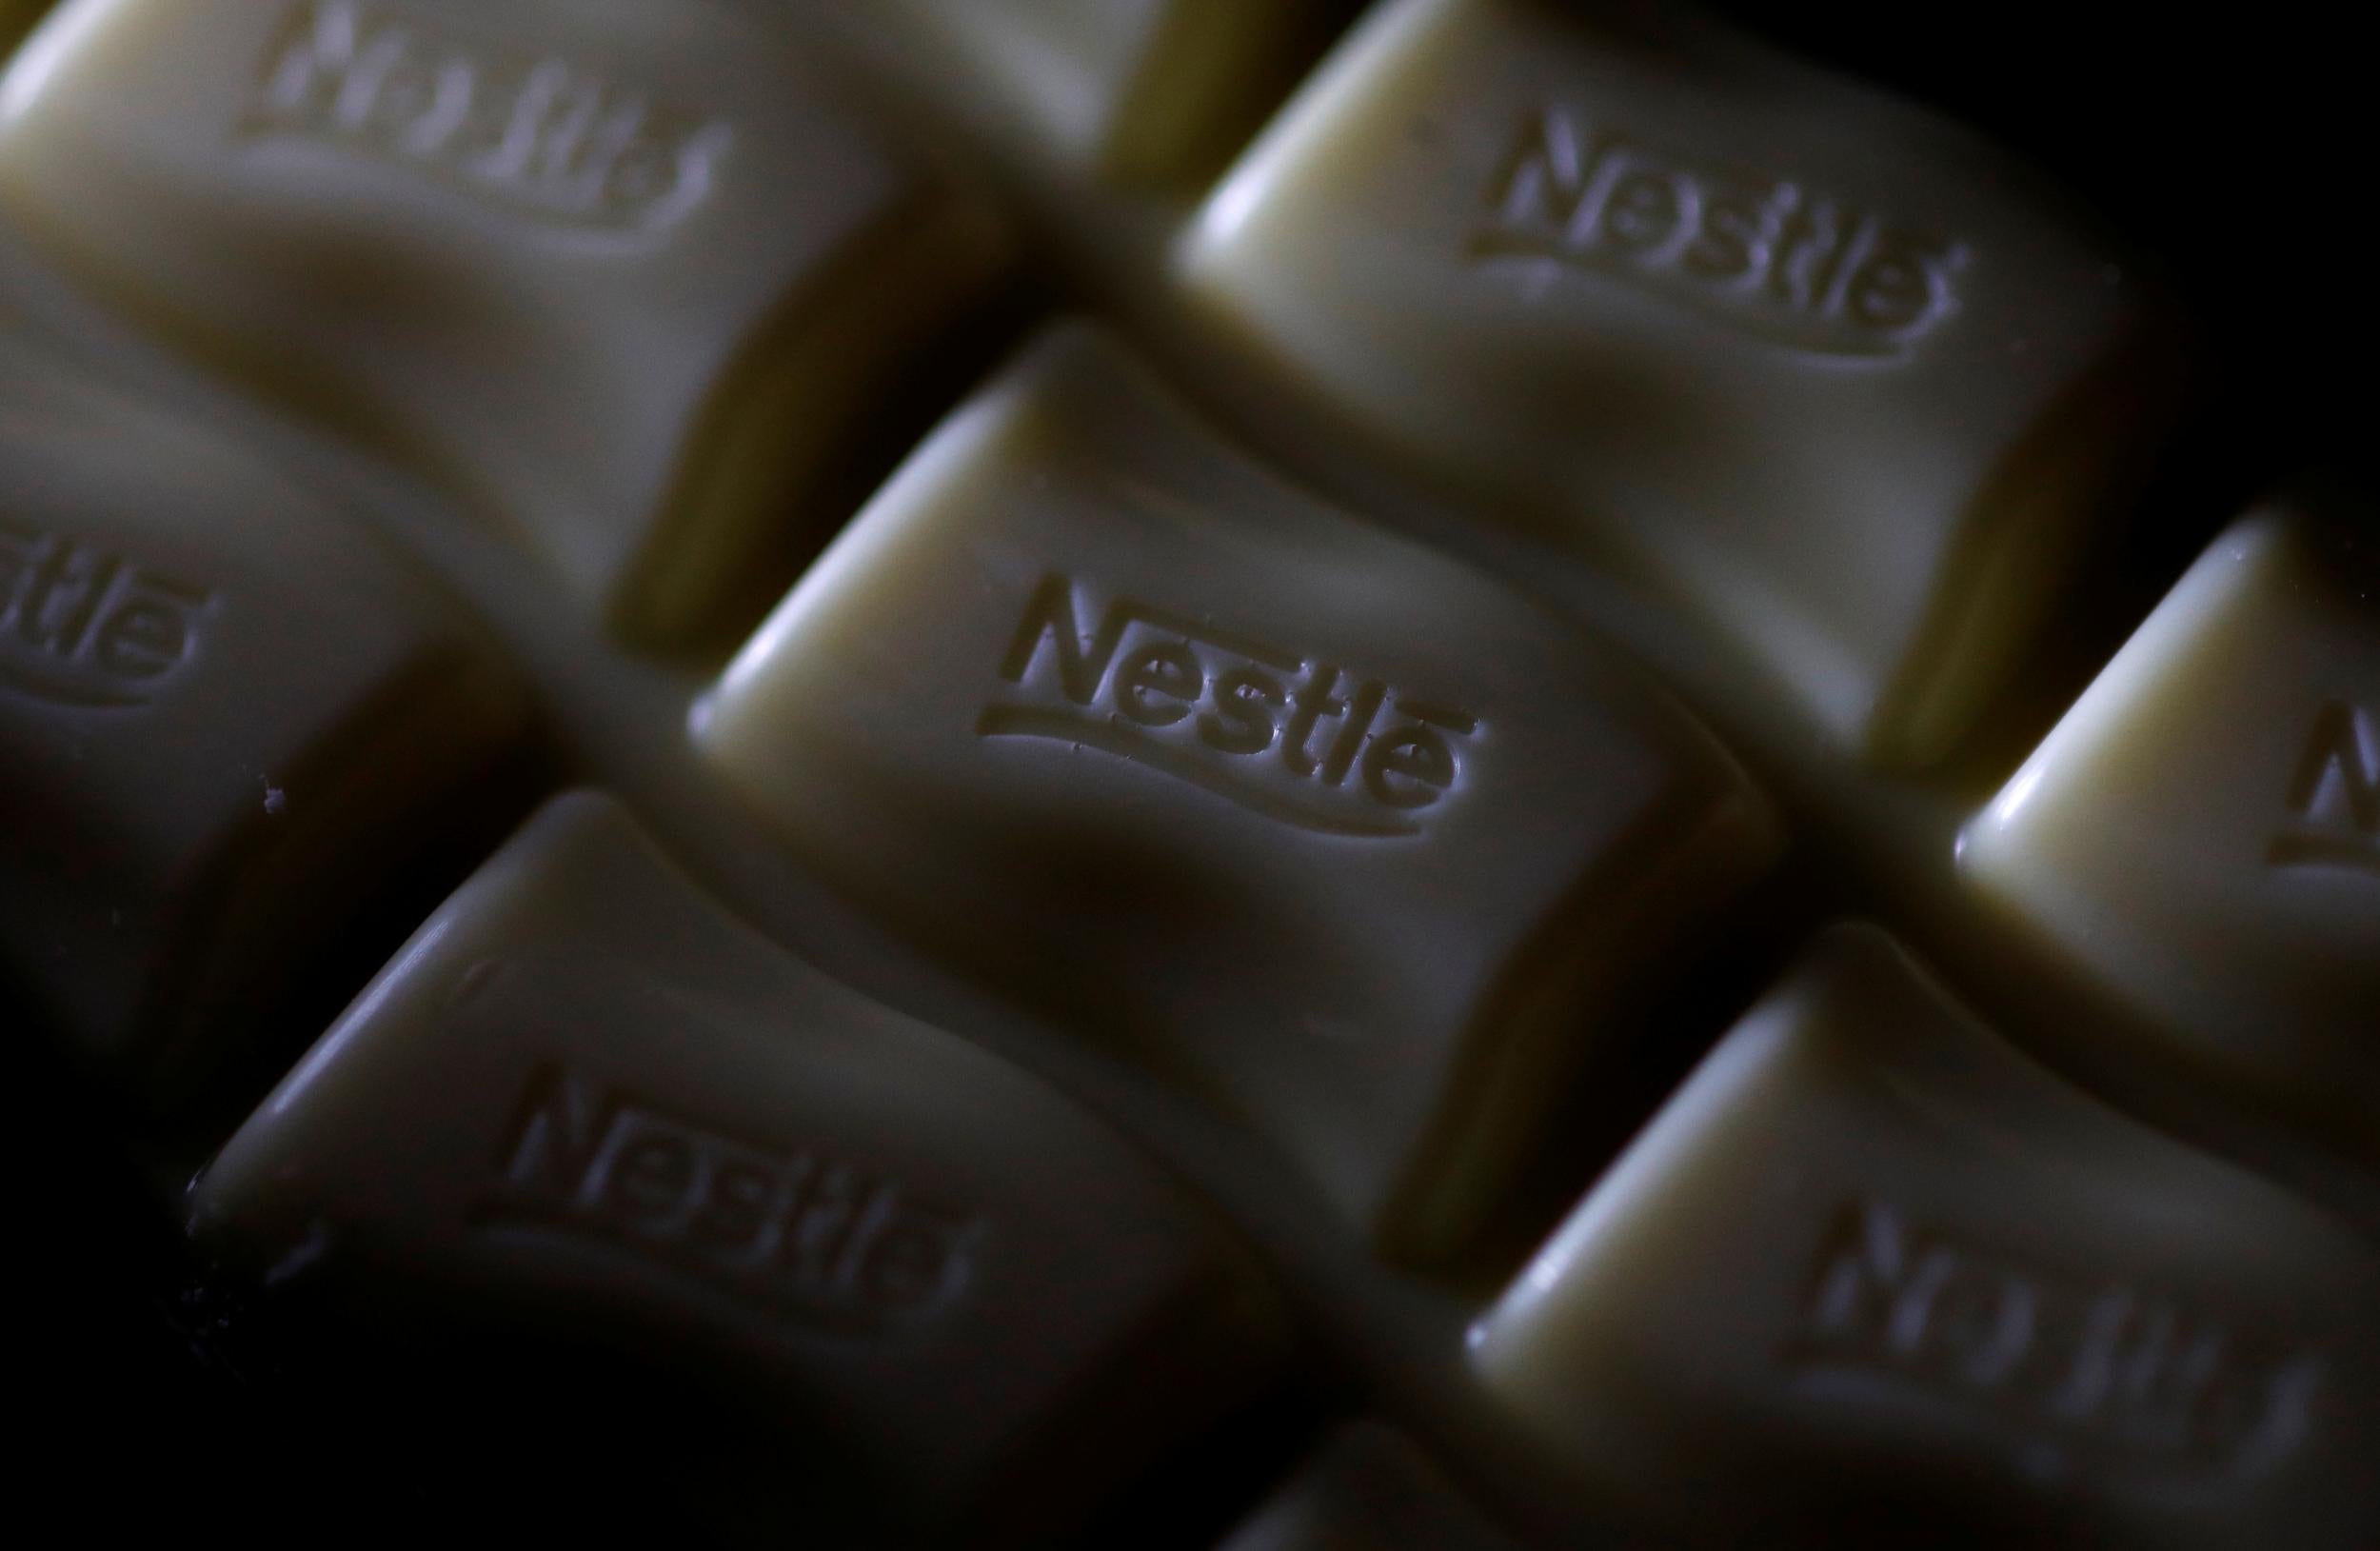 Nestle’s mass-market chocolate bars have underperformed rivals for years